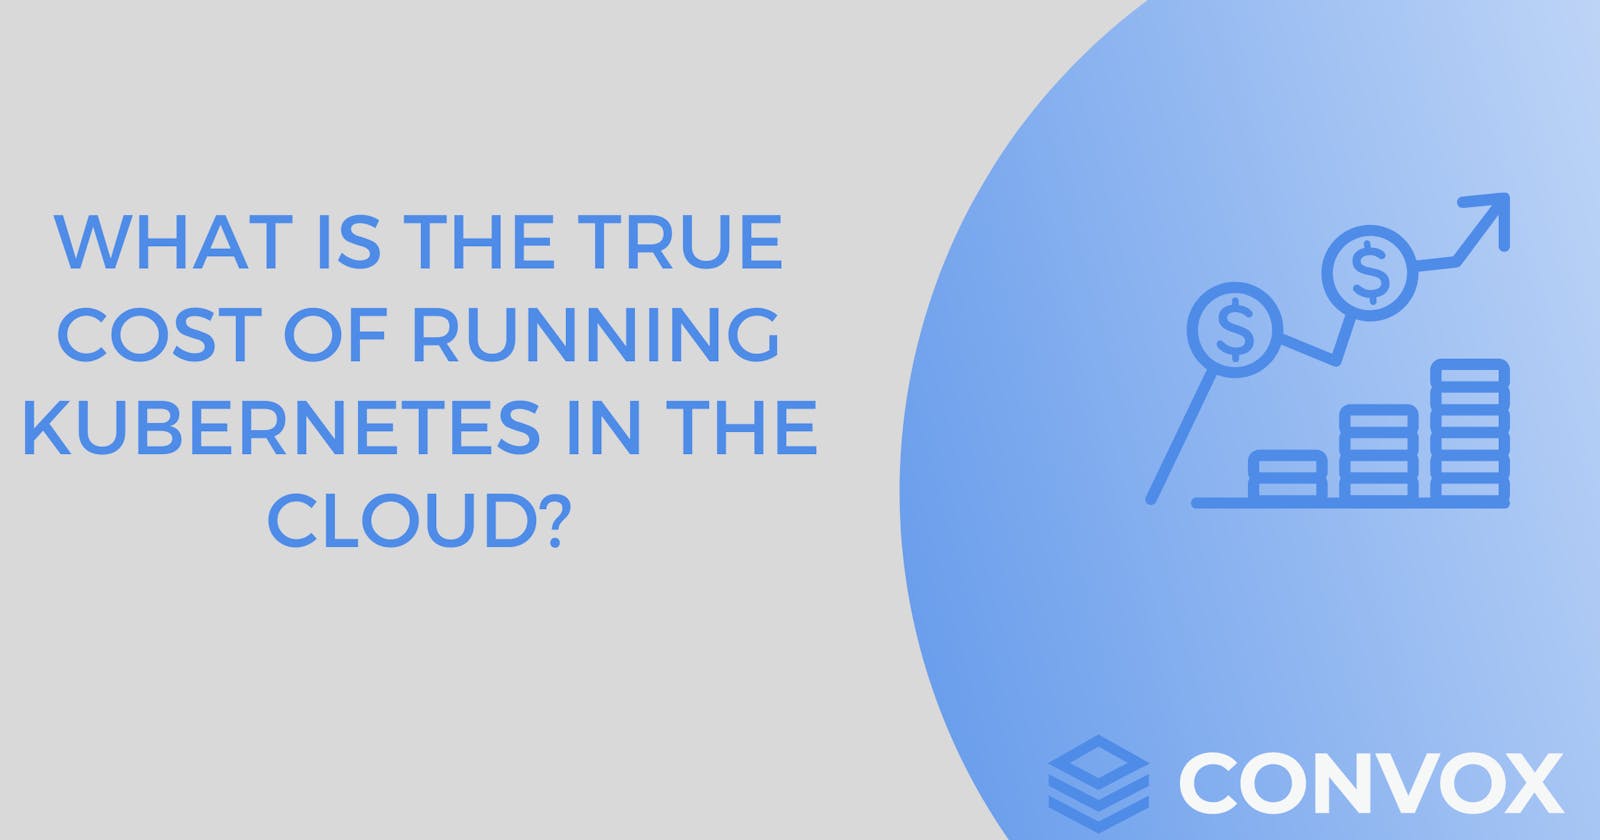 What's The True Cost of Running Kubernetes in the Cloud?